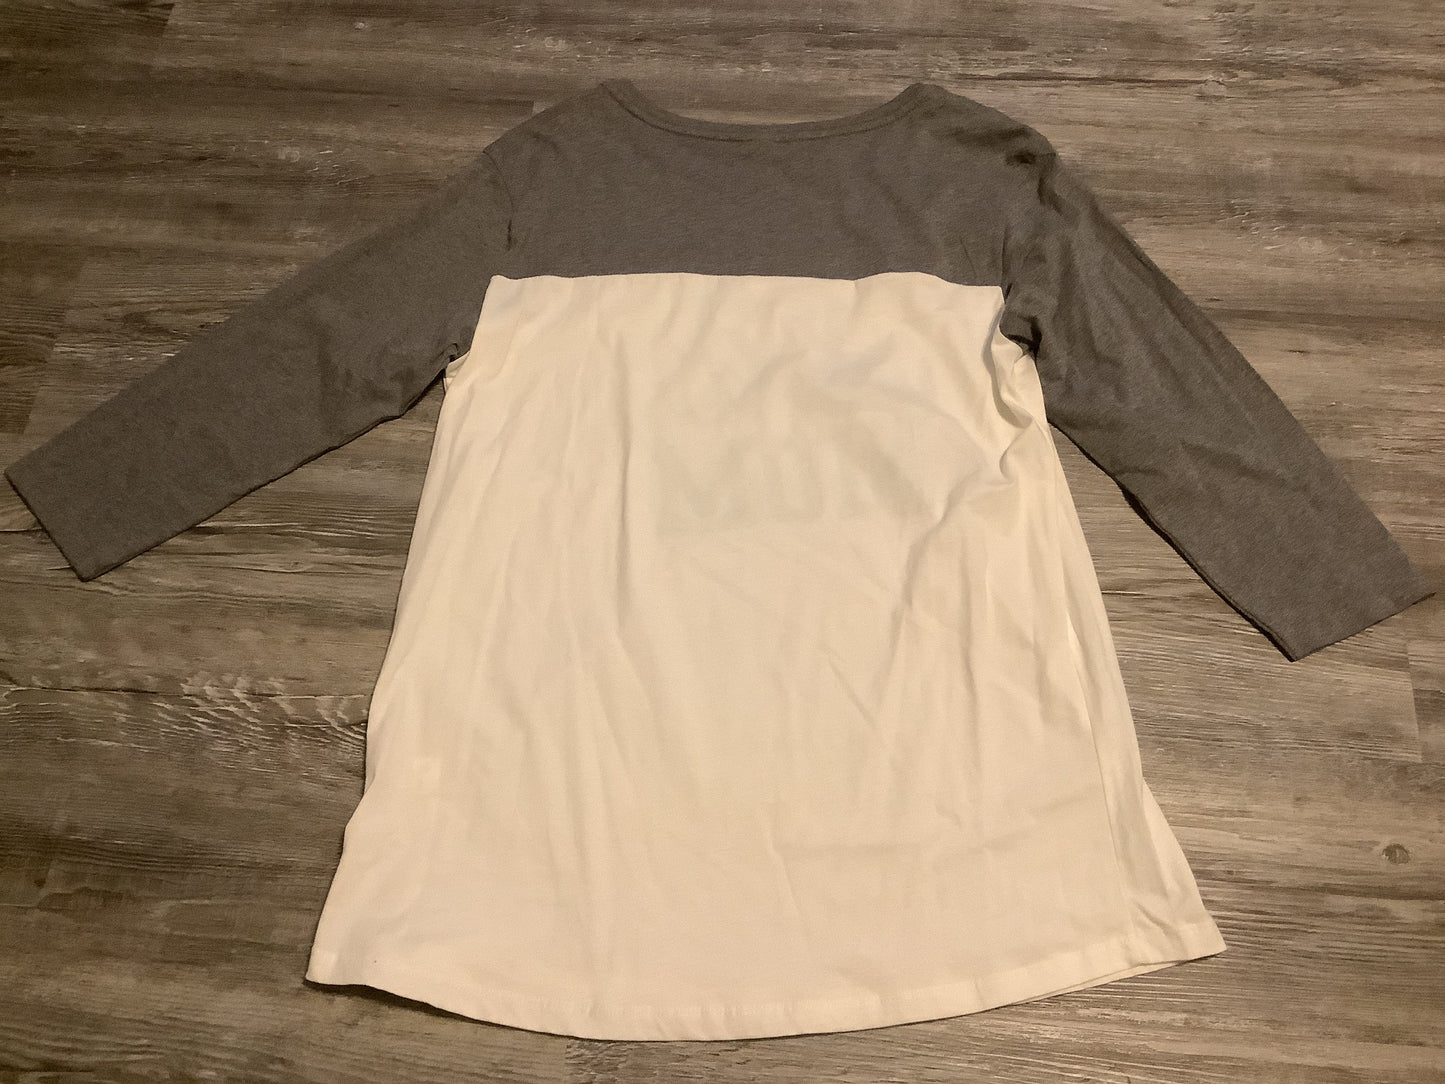 Grey & White Top Long Sleeve Basic Clothes Mentor, Size Xl